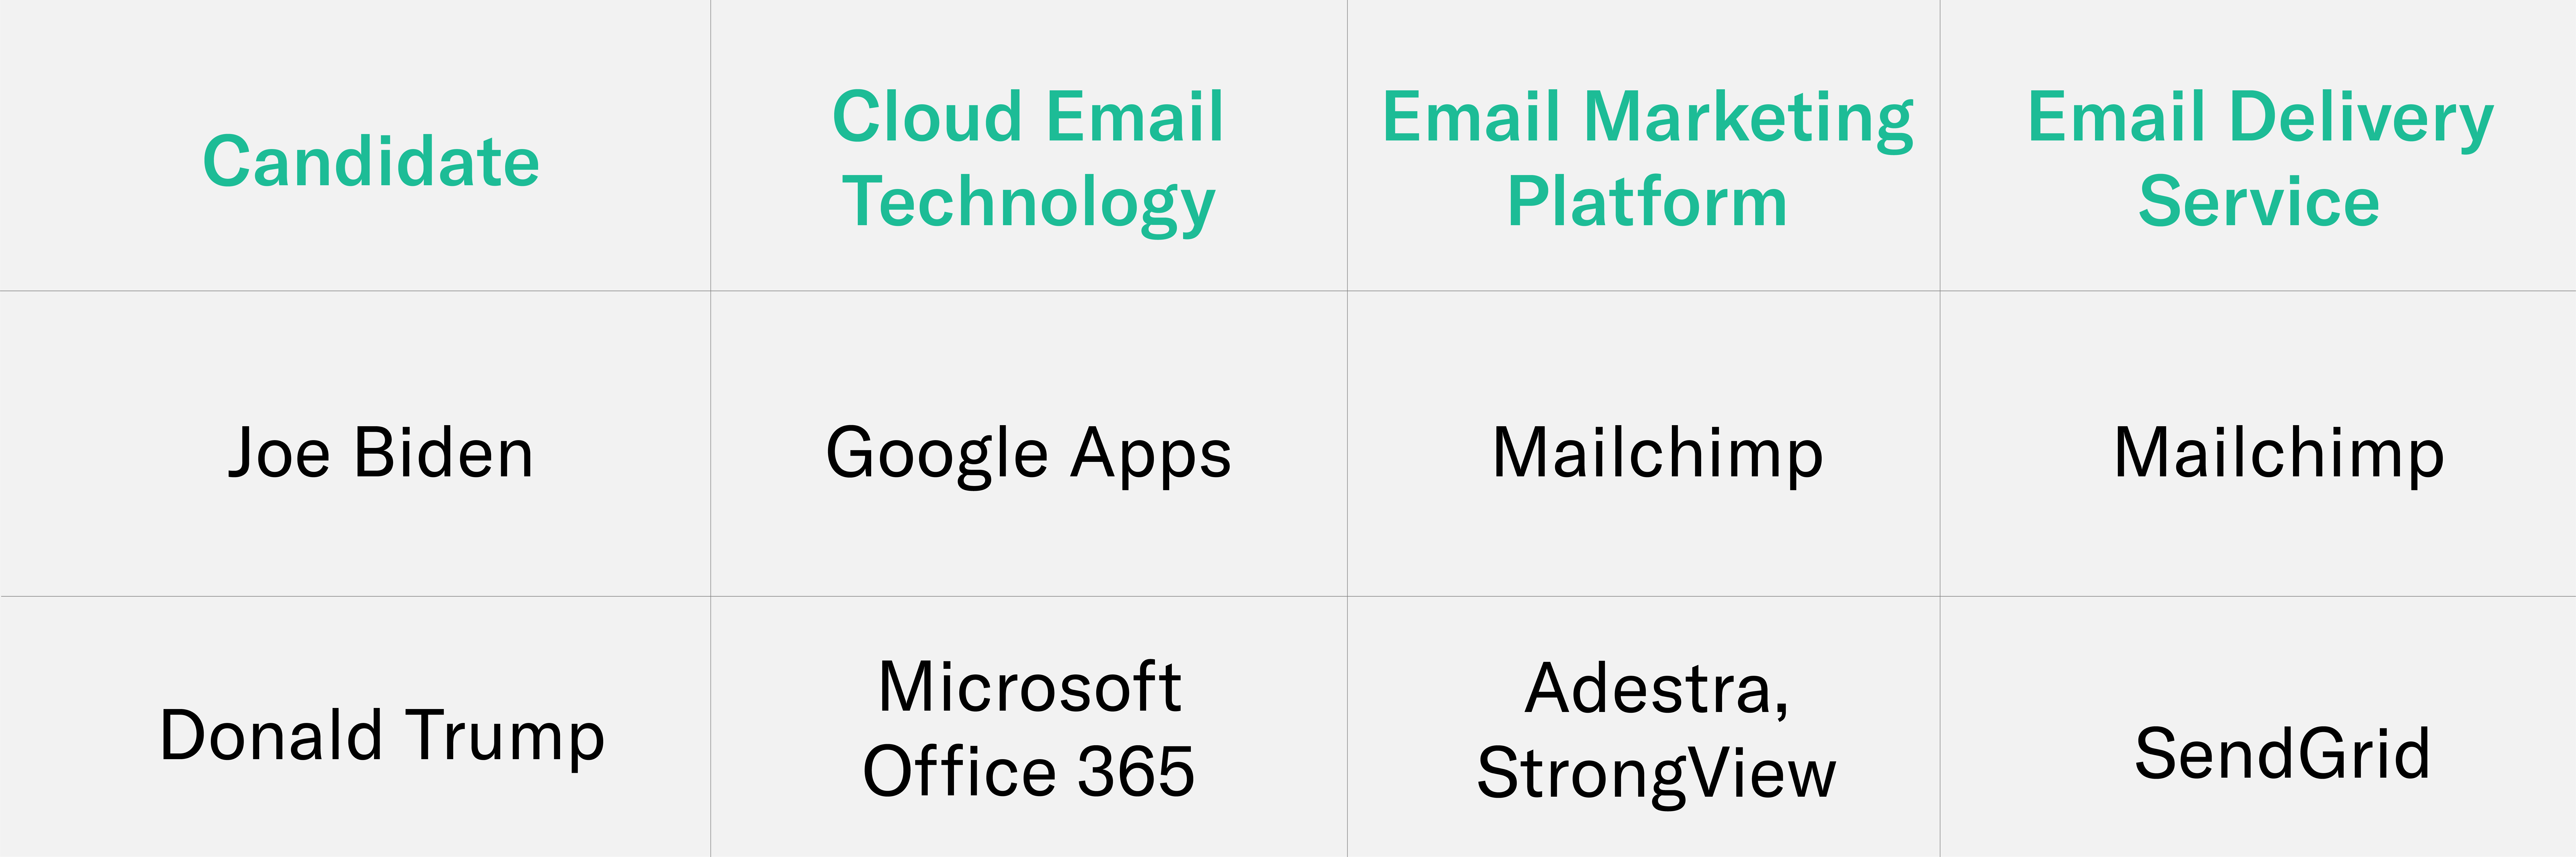 Comparison chart of email technologies used by Biden and Trump political campaigns